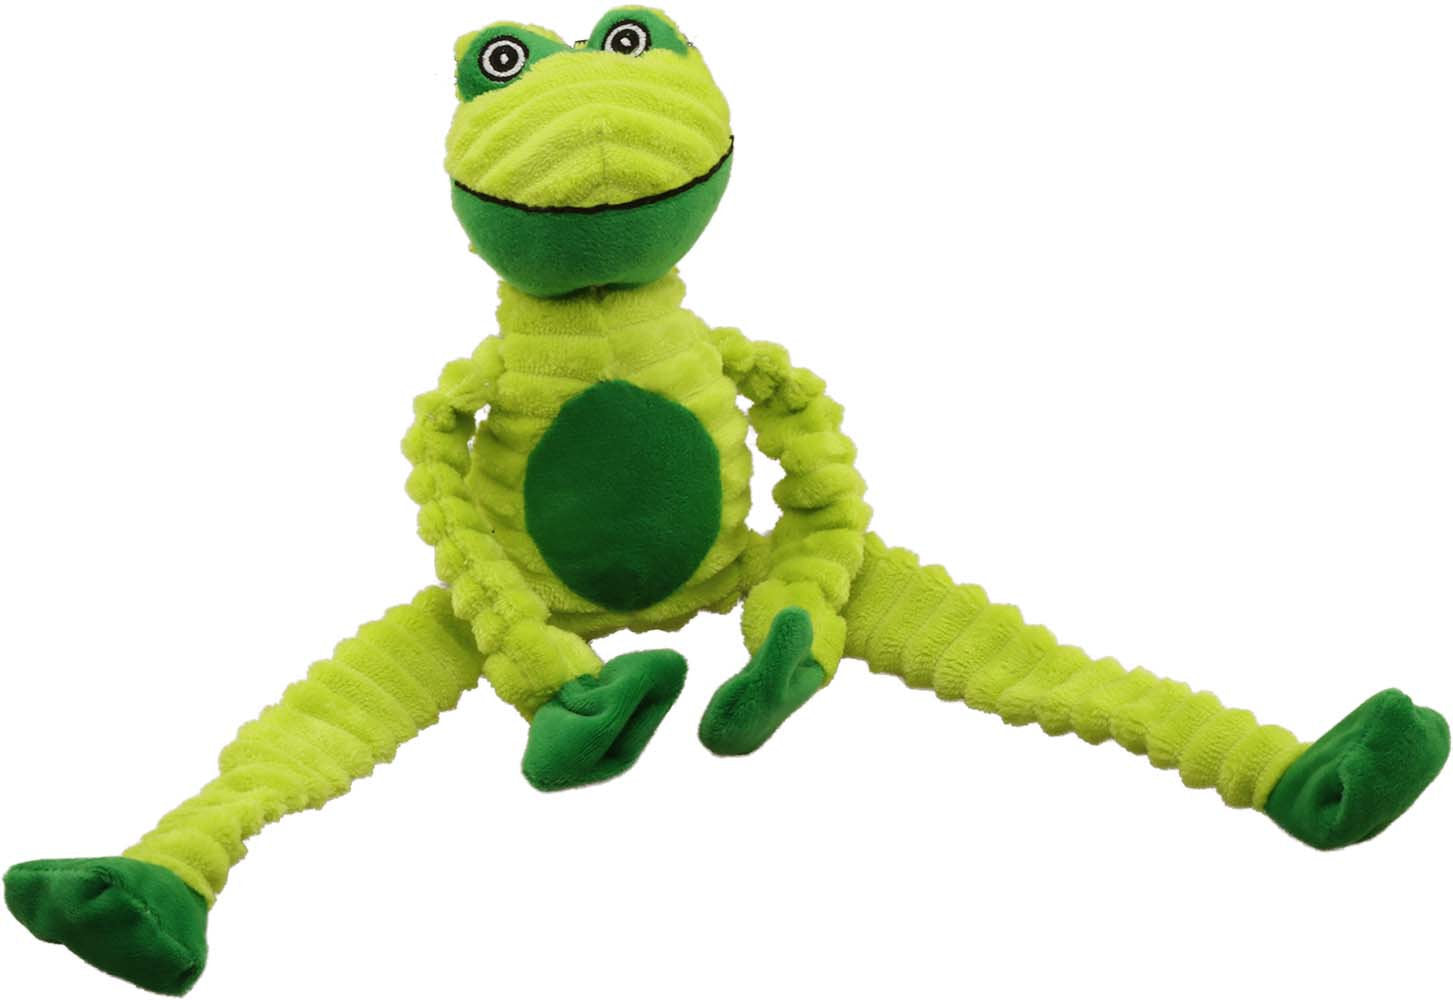 Petsport Critter Tug Double Stiched Plush Dog Toy - Assorted - 1 Piece - Heads Up For Tails